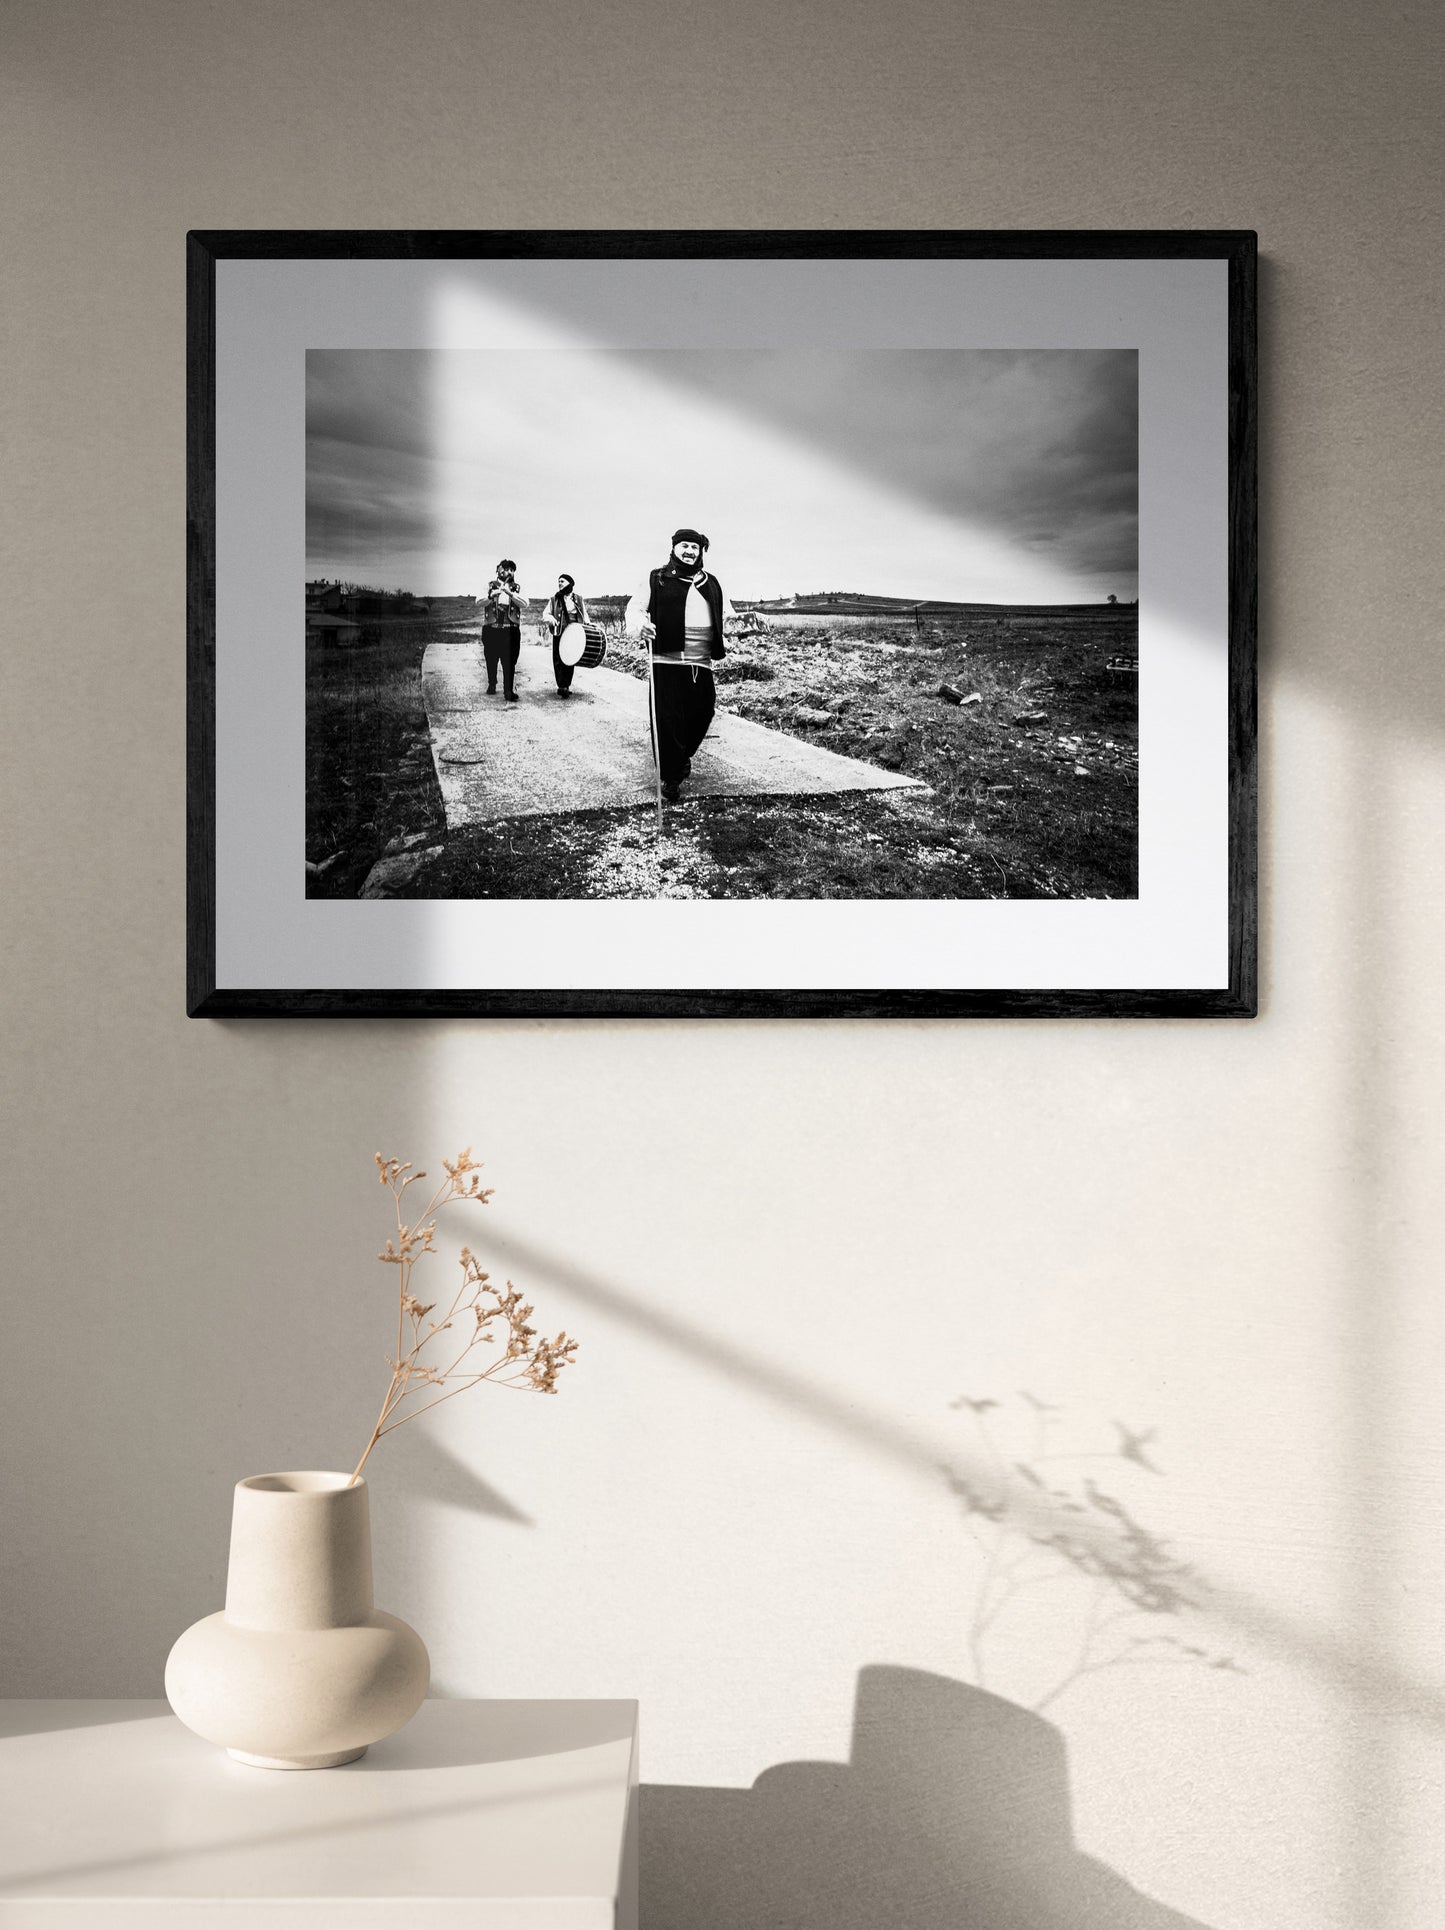 Black and White Photography Wall Art Greece | Purpuris in Isaakion Didimotichon Thrace by George Tatakis - single framed photo